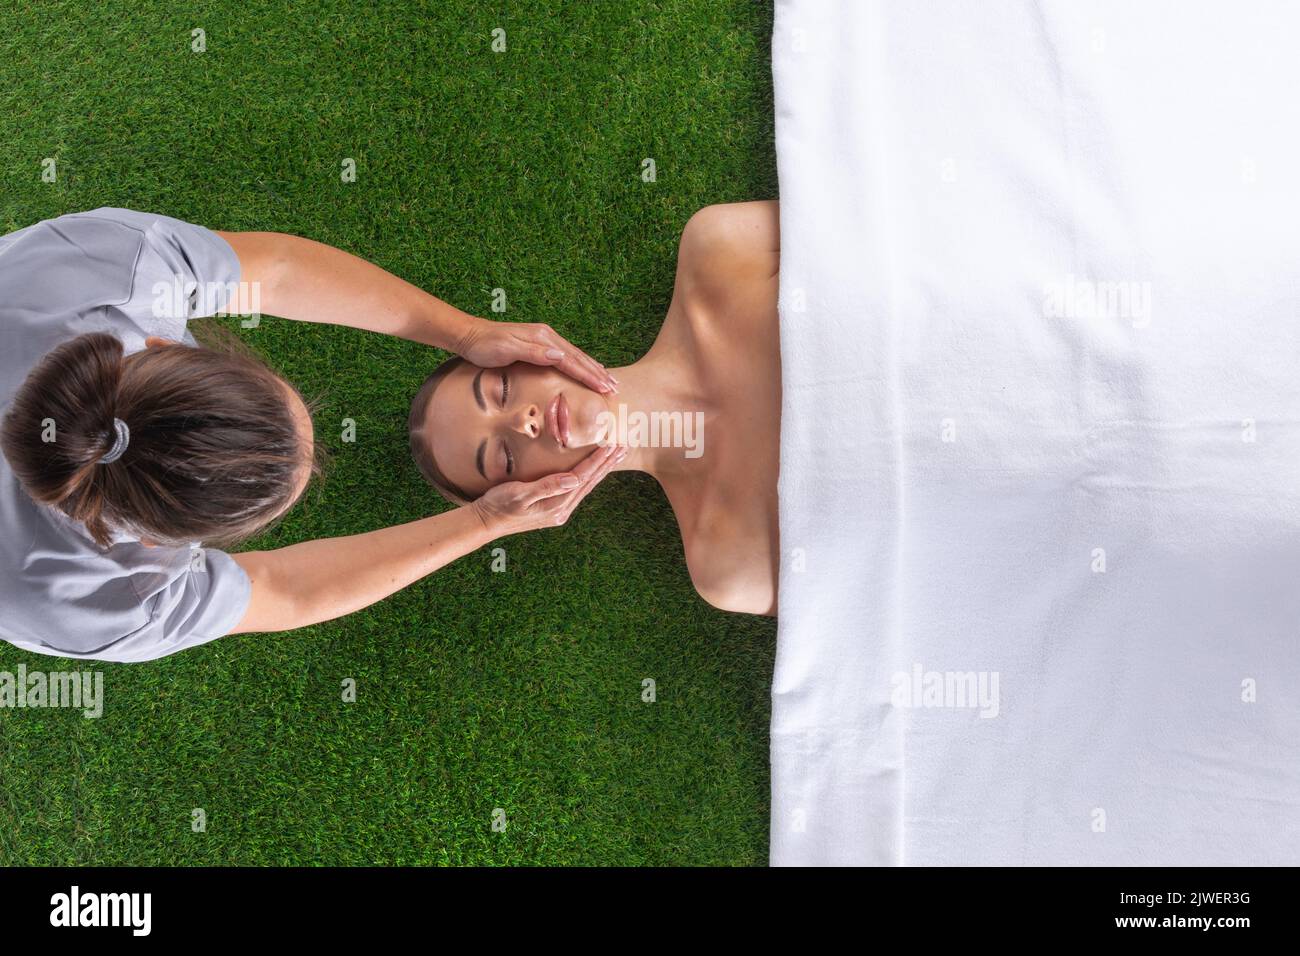 Releasing stress. Top view of beautiful young woman lying on back while massage therapist massaging her face over green grass background Stock Photo